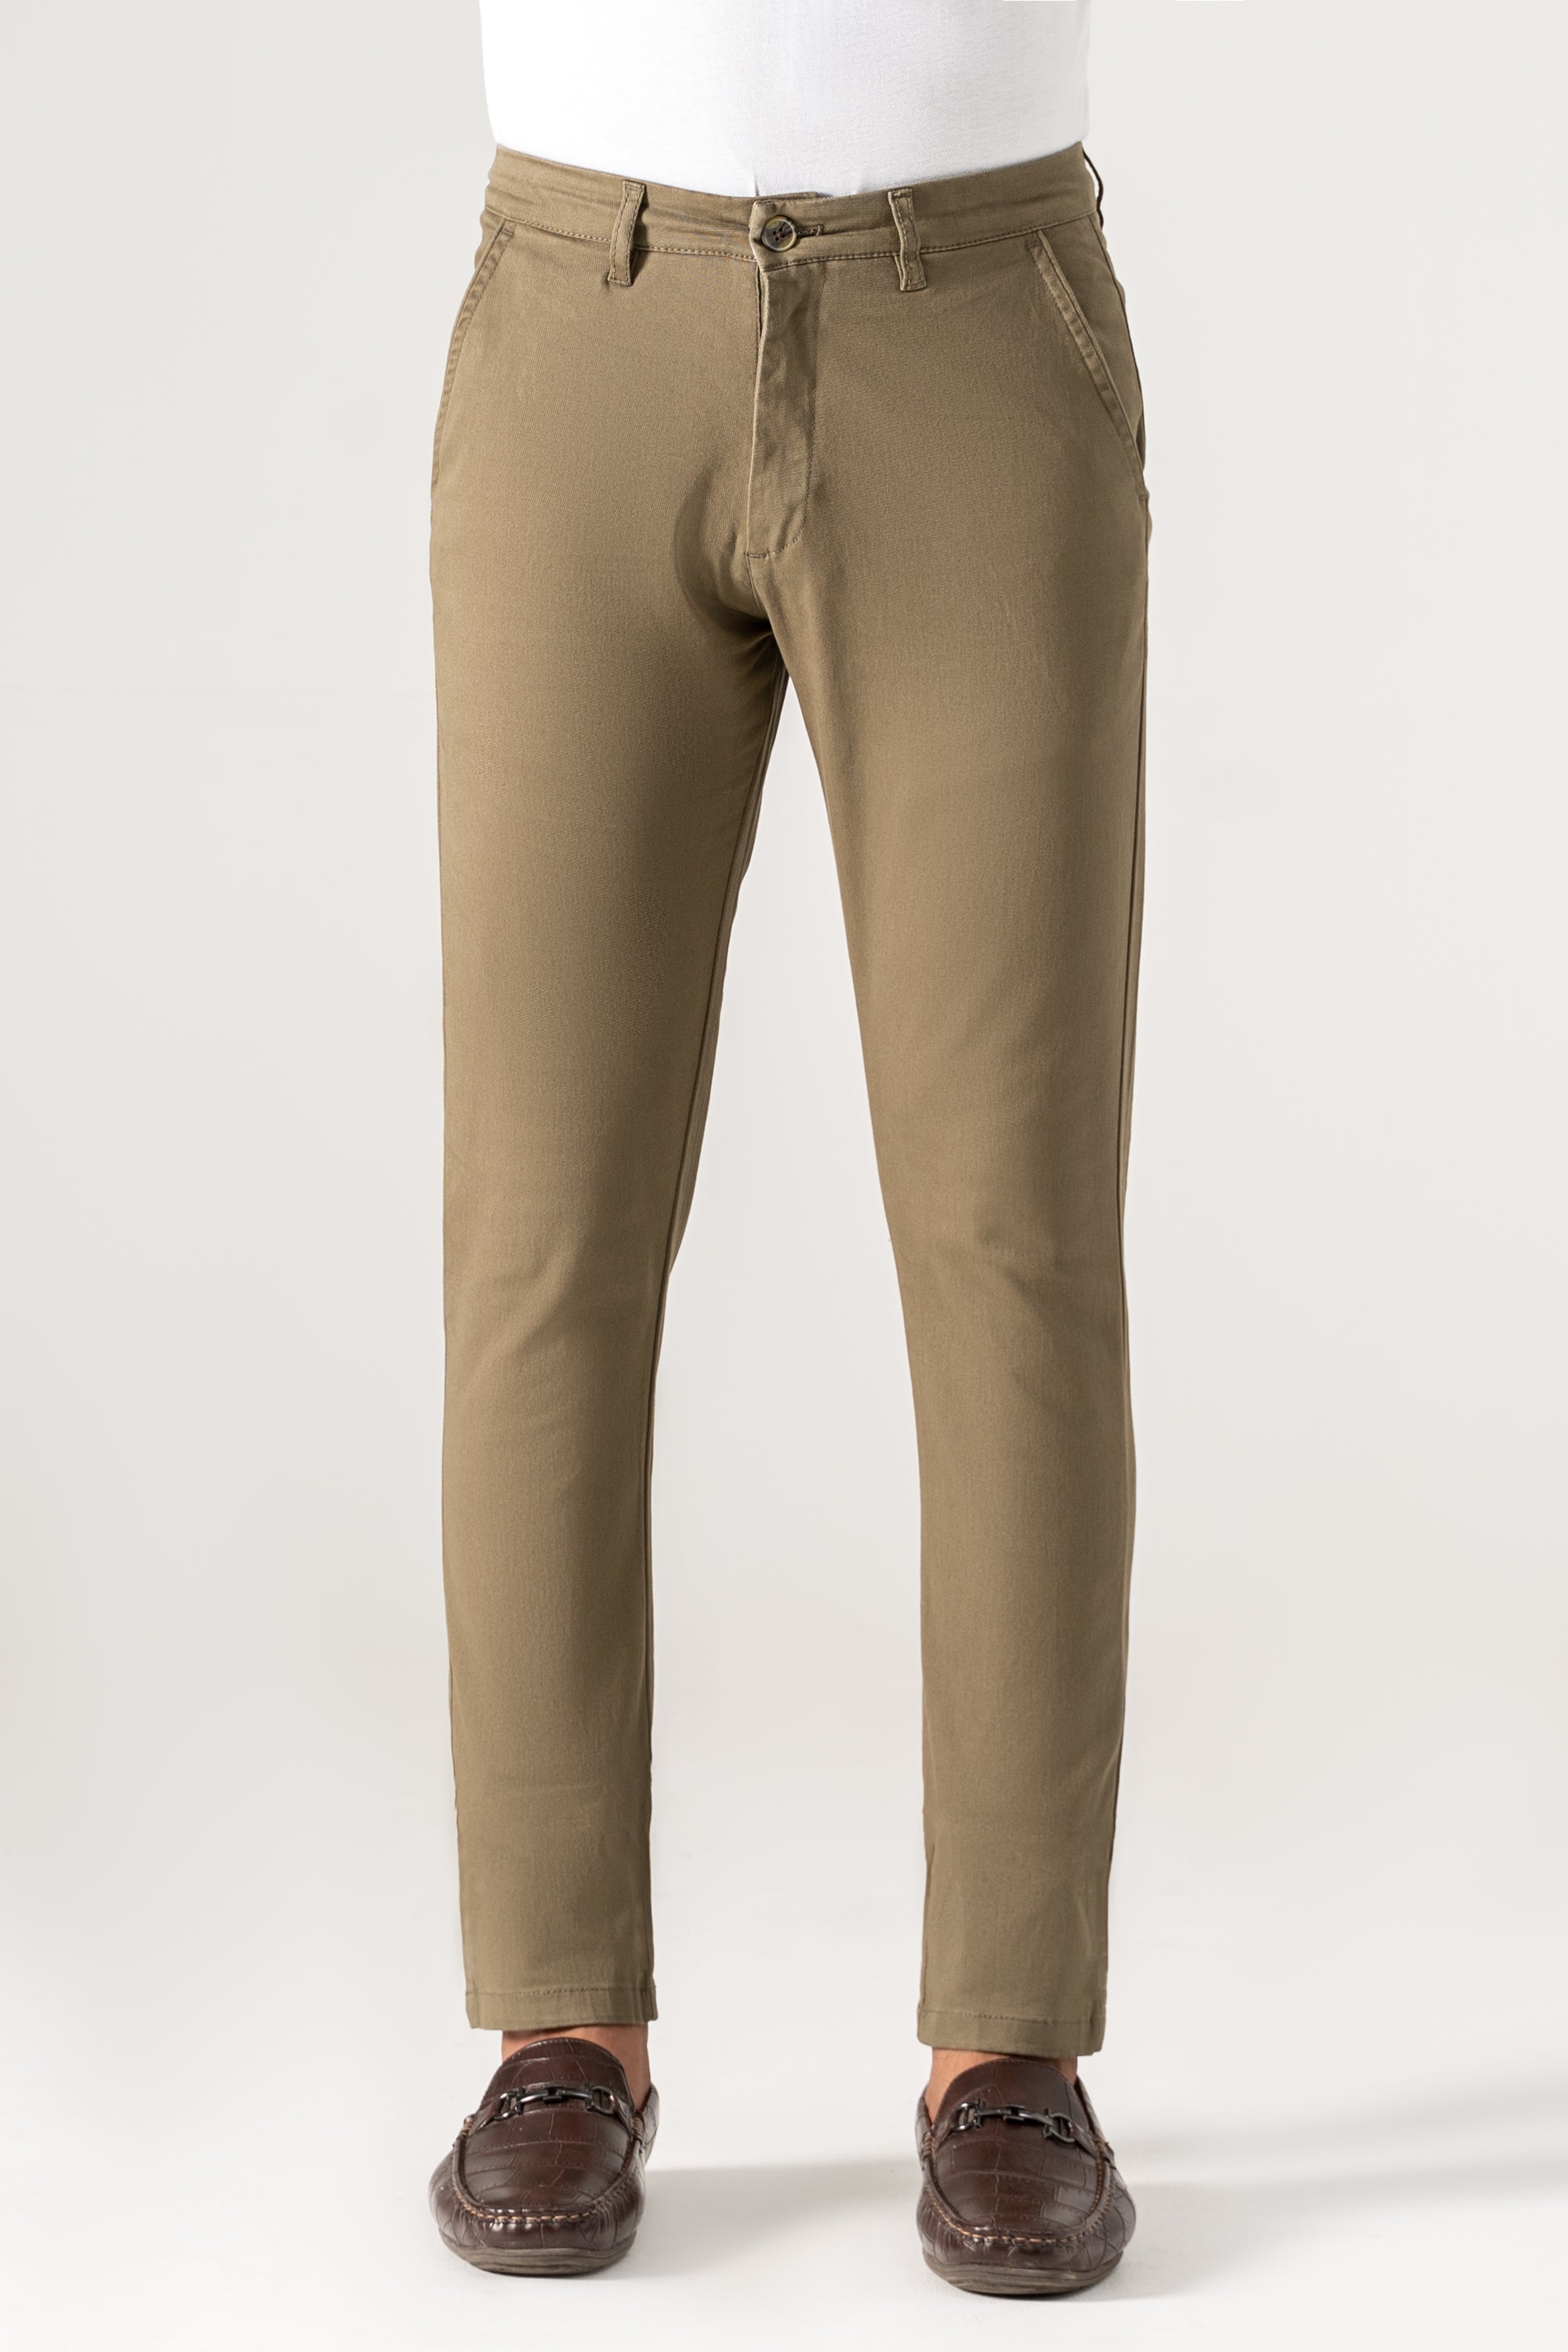 CROSS POCKET CASUAL PANT OLIVE